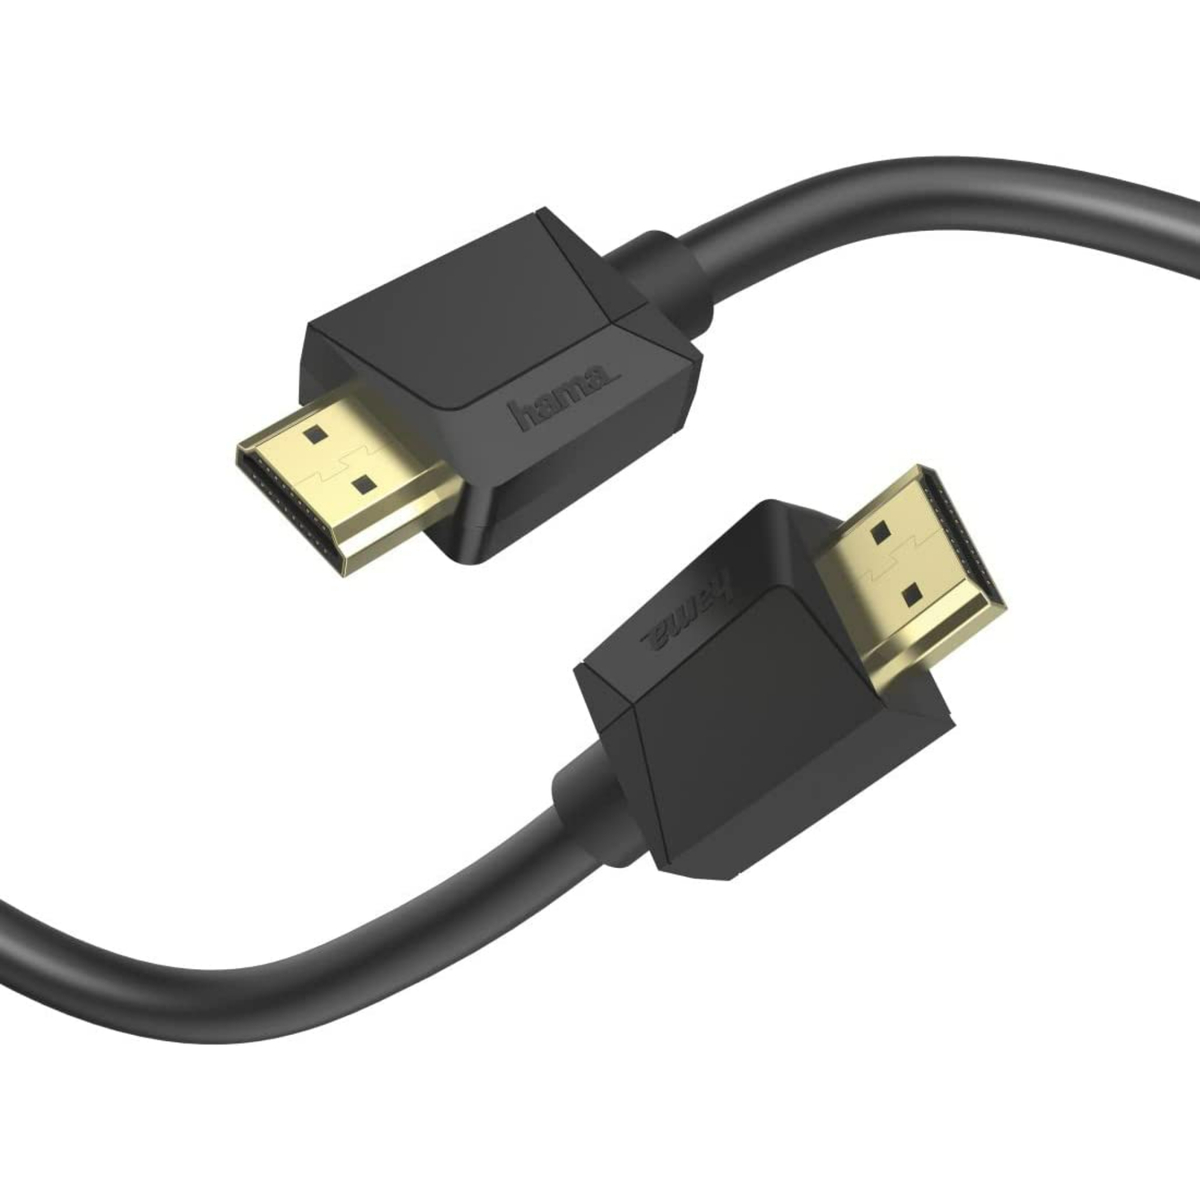 Hama Ultra High Speed HDMI Cable, 8K, 2 m, Black, 205242